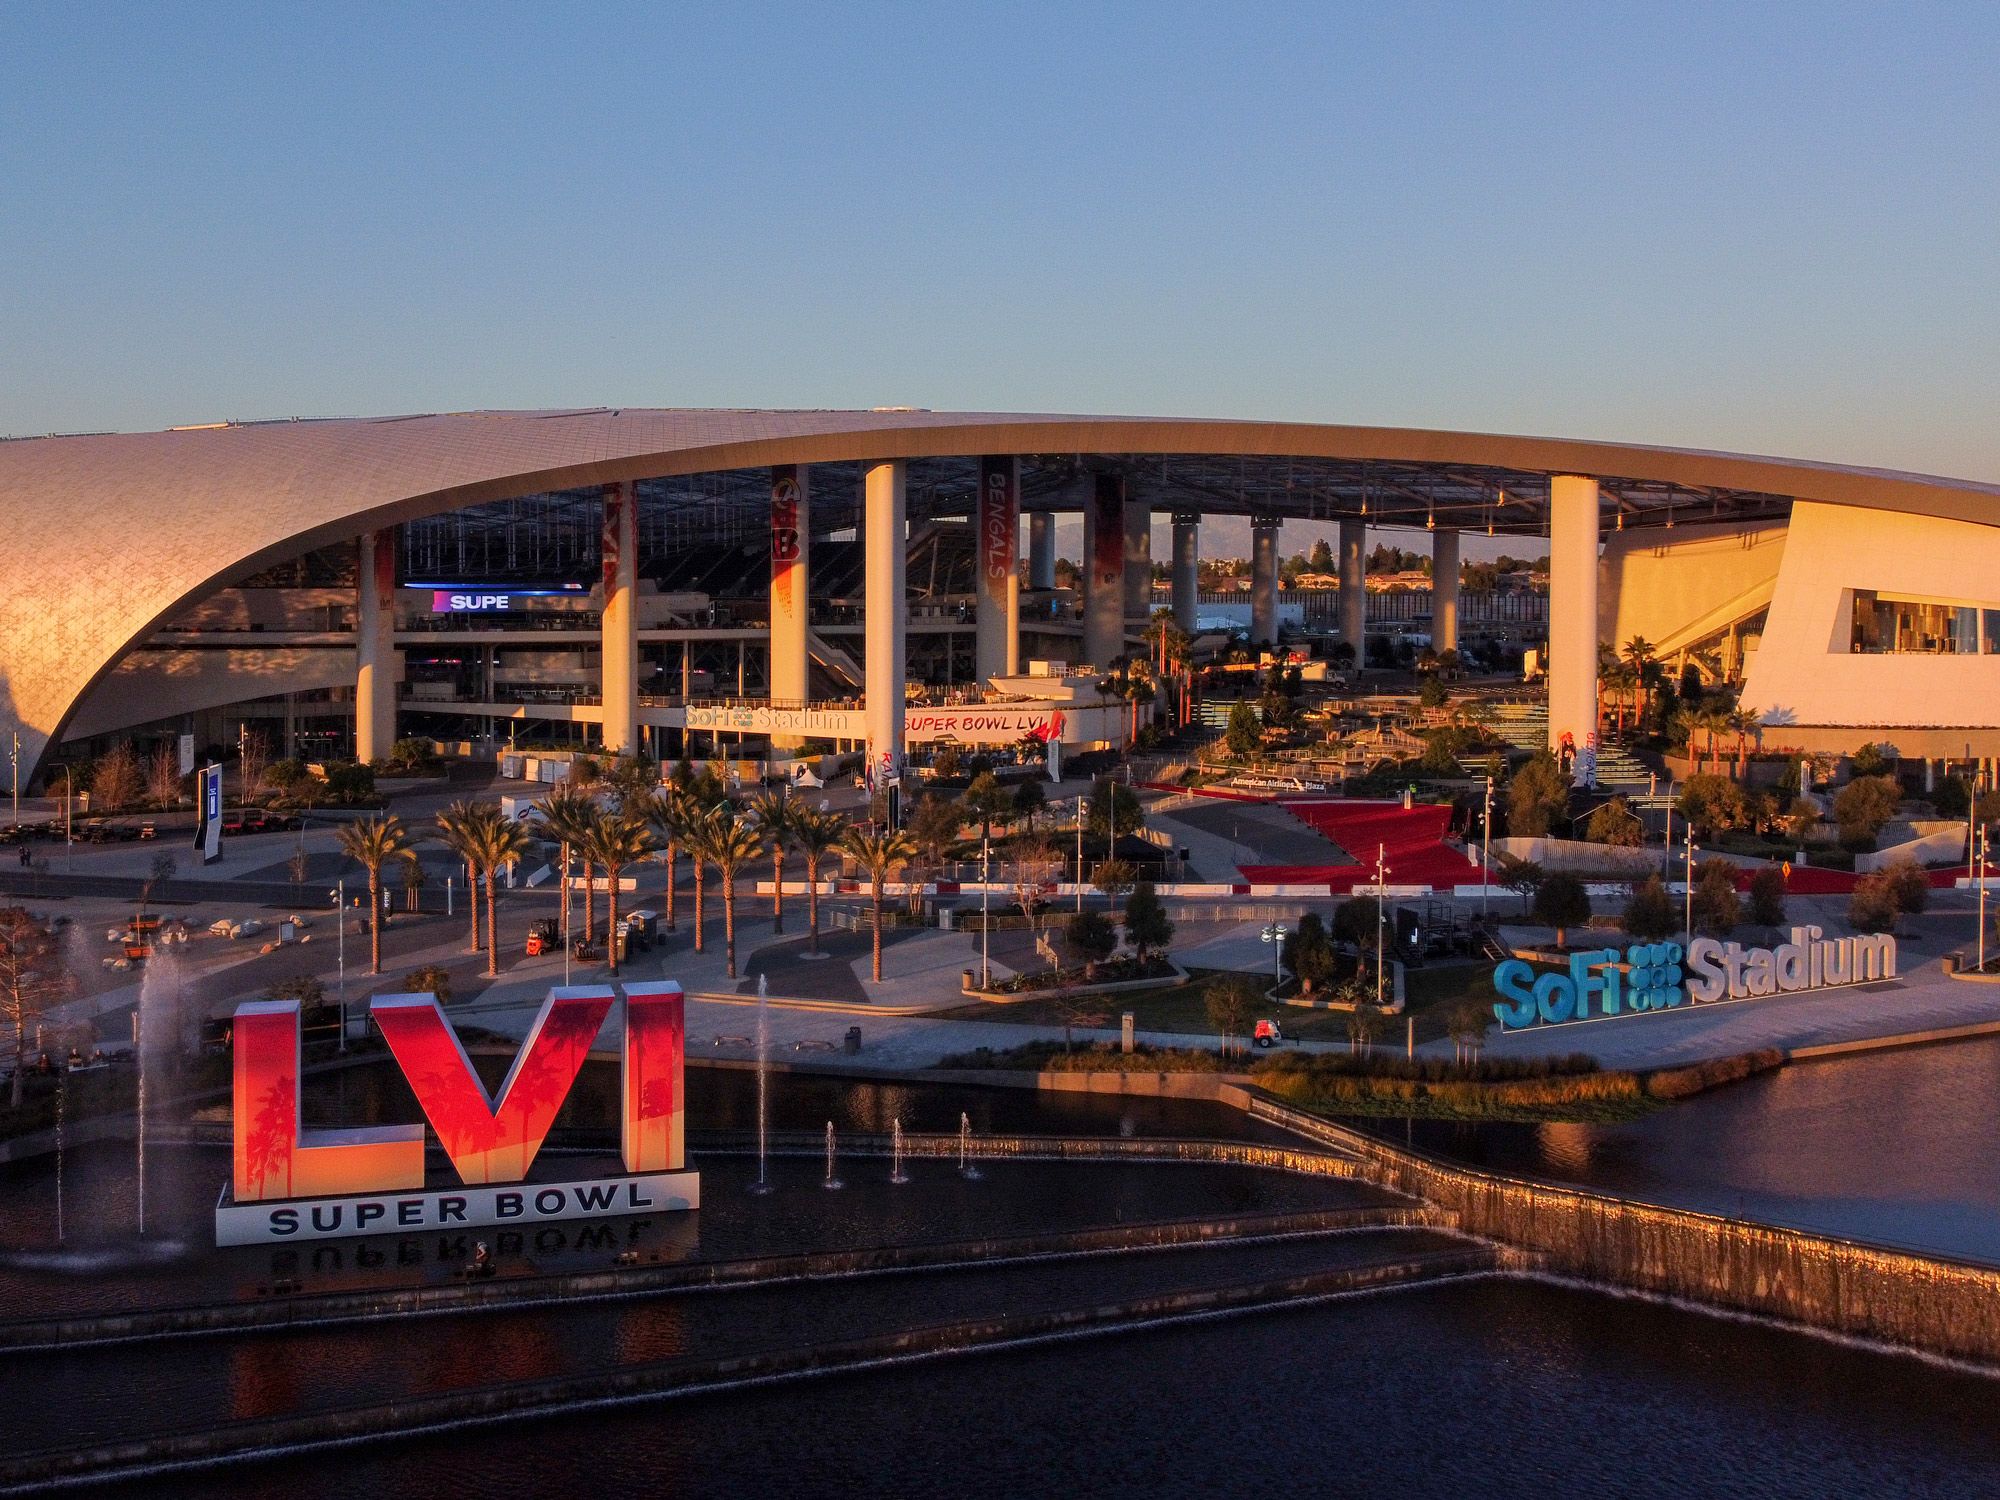 SoFi Stadium and the Super Bowl: 6 cool features of the NFL's newest venue